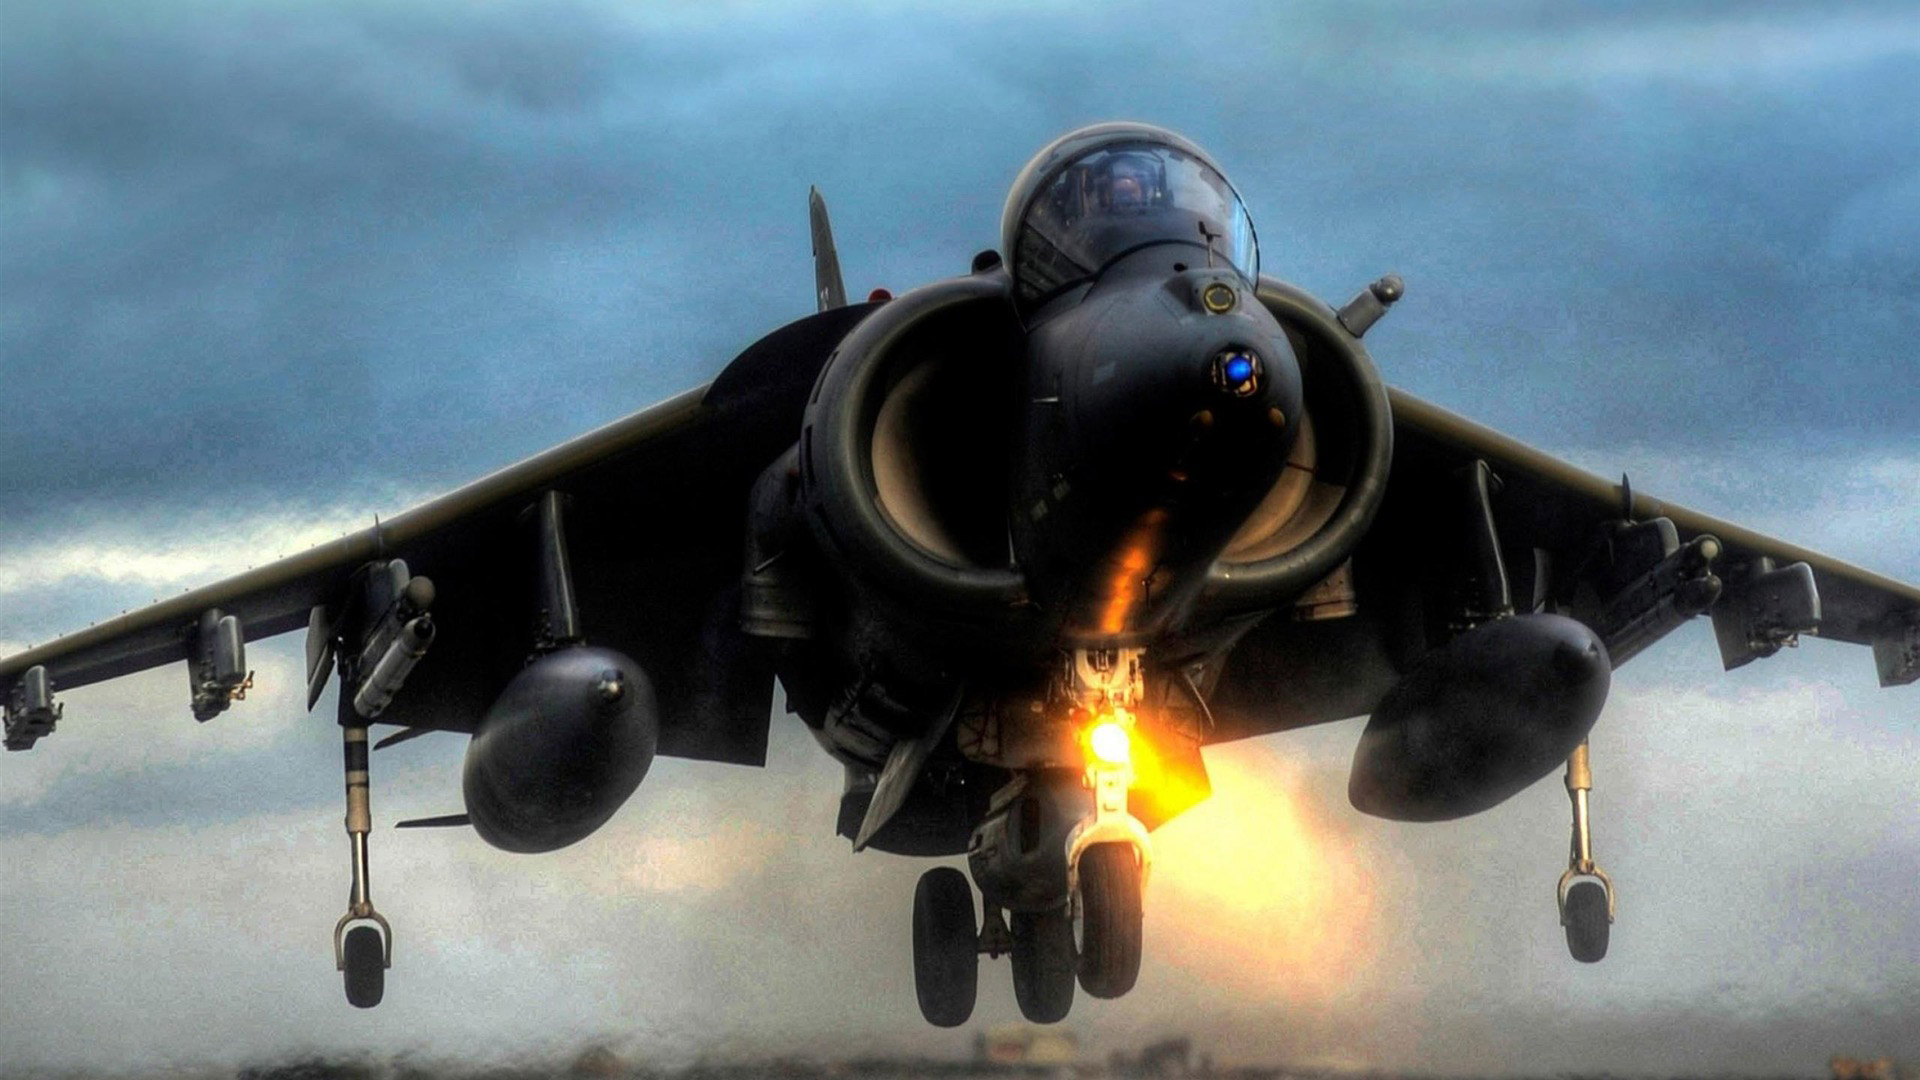 fighter aircraft hd wallpaper wallpapers55com   Best Wallpapers for 1920x1080